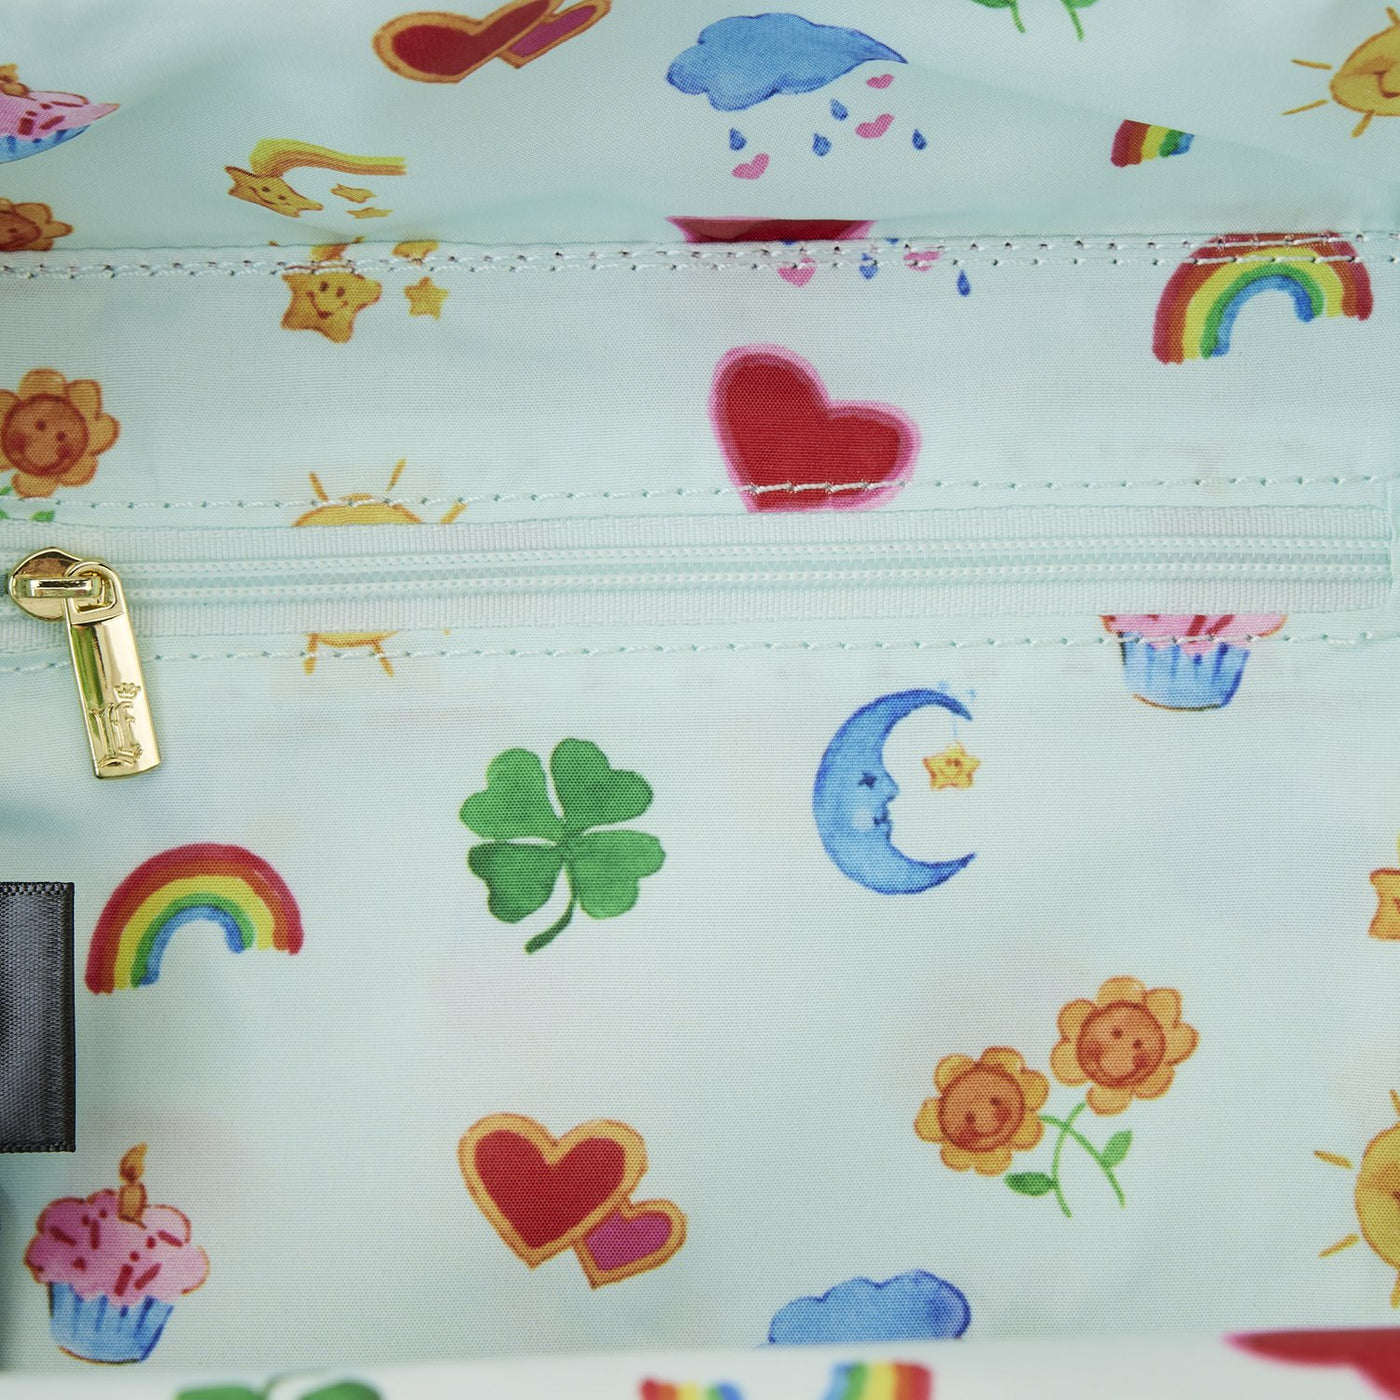 Loungefly Care Bears Heart Cloud Party Crossbody Bag with Rainbow Strap